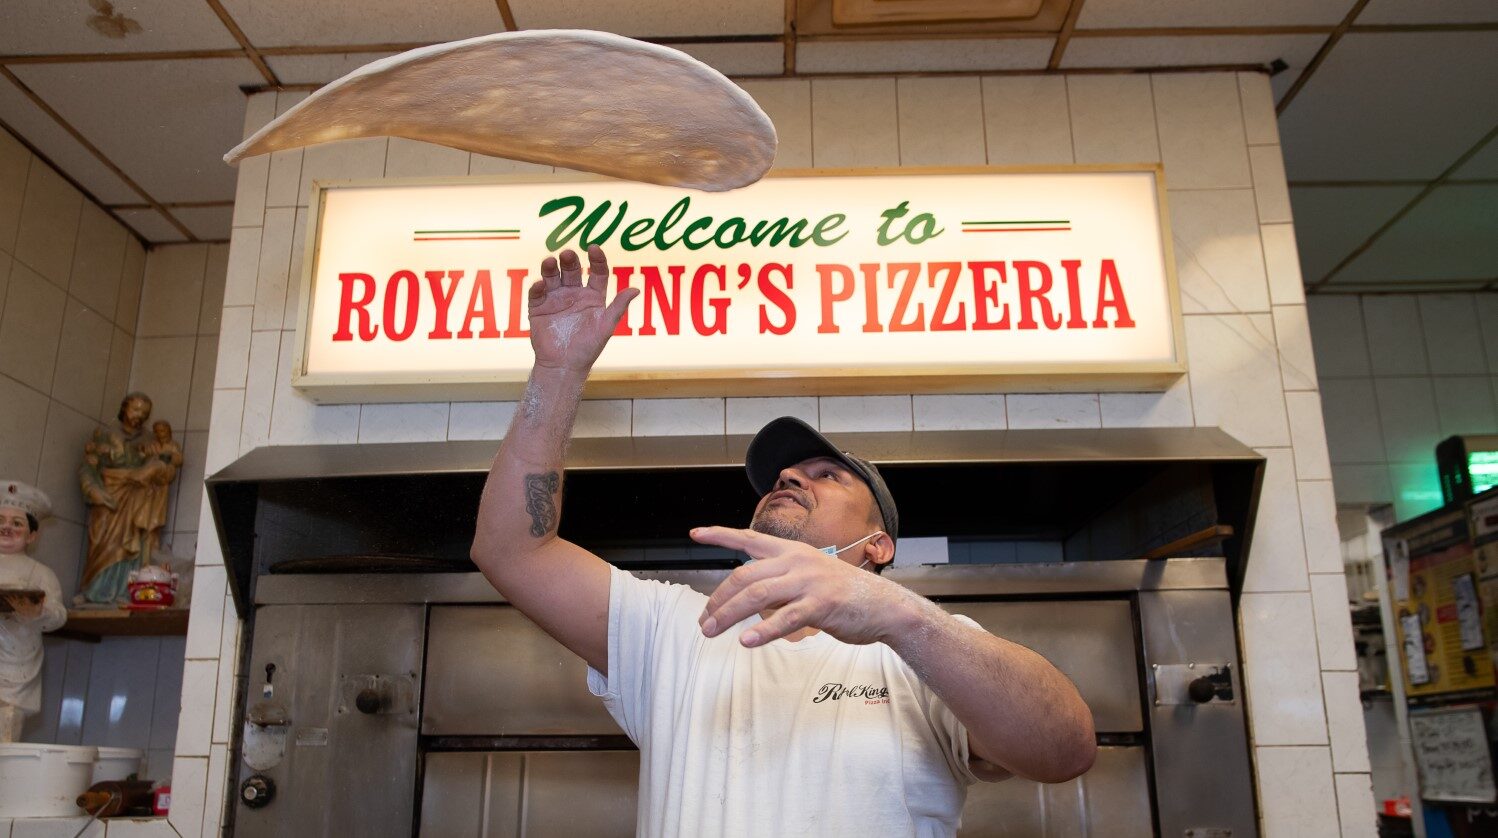 A pizza chef expertly tosses dough in the air at royal king’s pizzeria, under a welcoming sign, with decor including figurines on display.